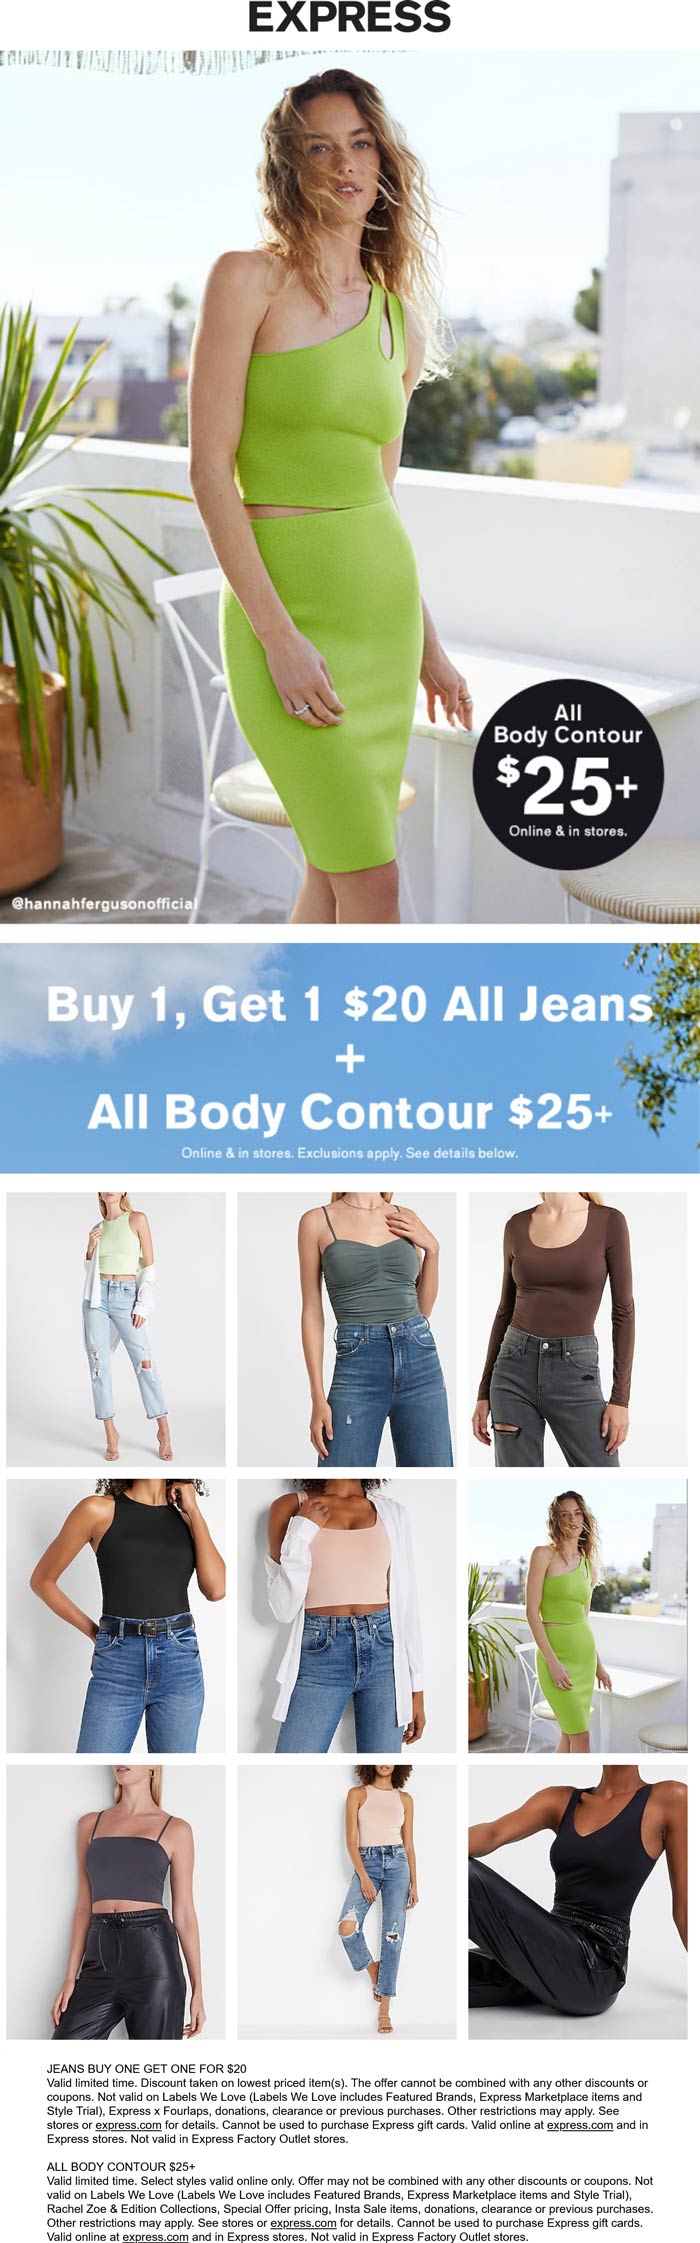 Express stores Coupon  Second jeans $20 at Express, ditto online #express 